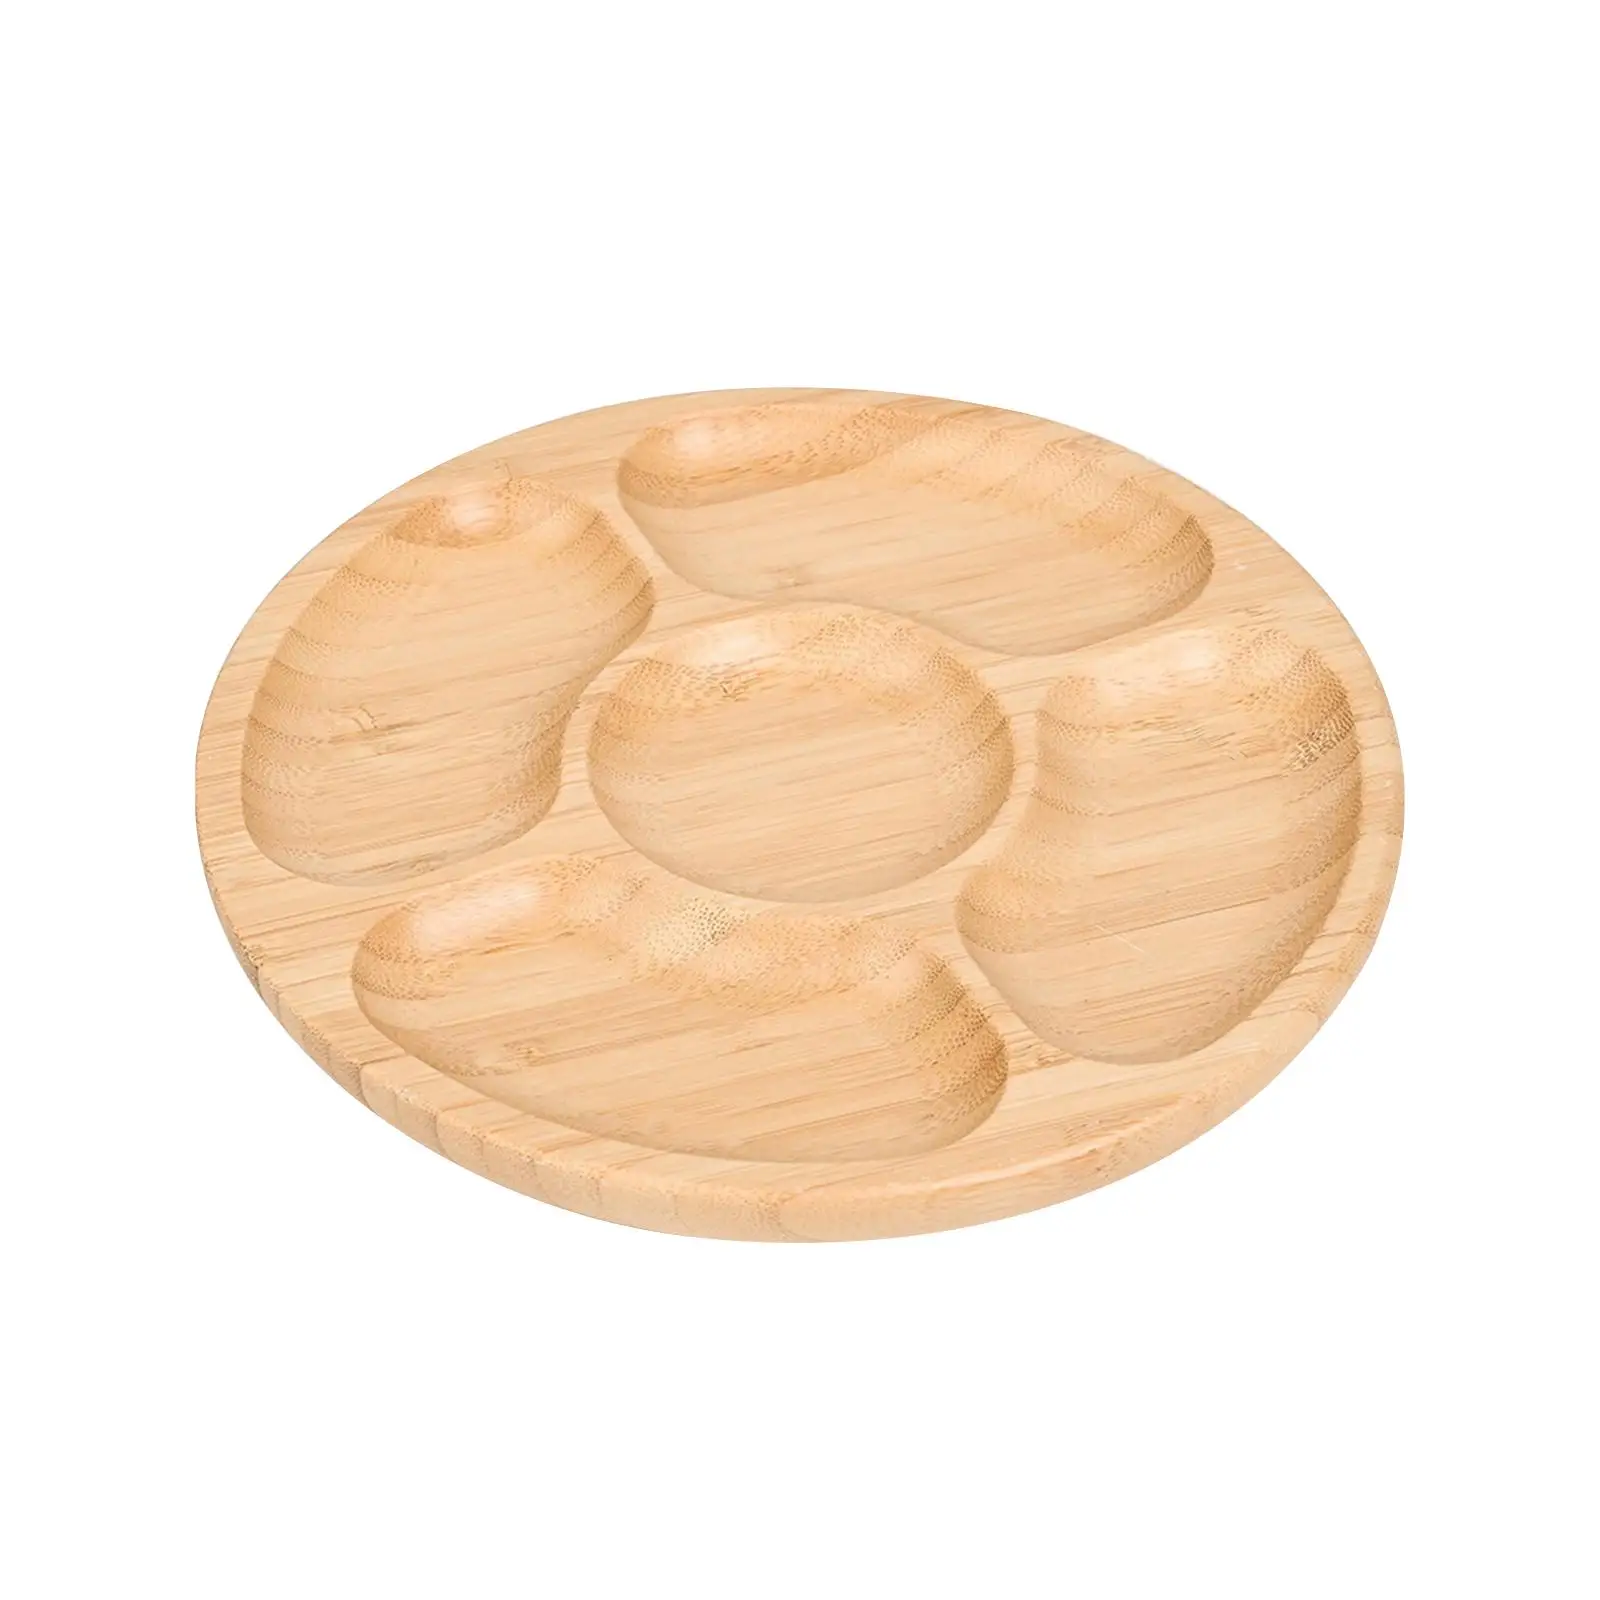 Wooden Tray Decorative Display Sectional Wooden Trays Wood Serving Platter Fruit Plate for Dinner Bread Wedding Cheese Vegetable